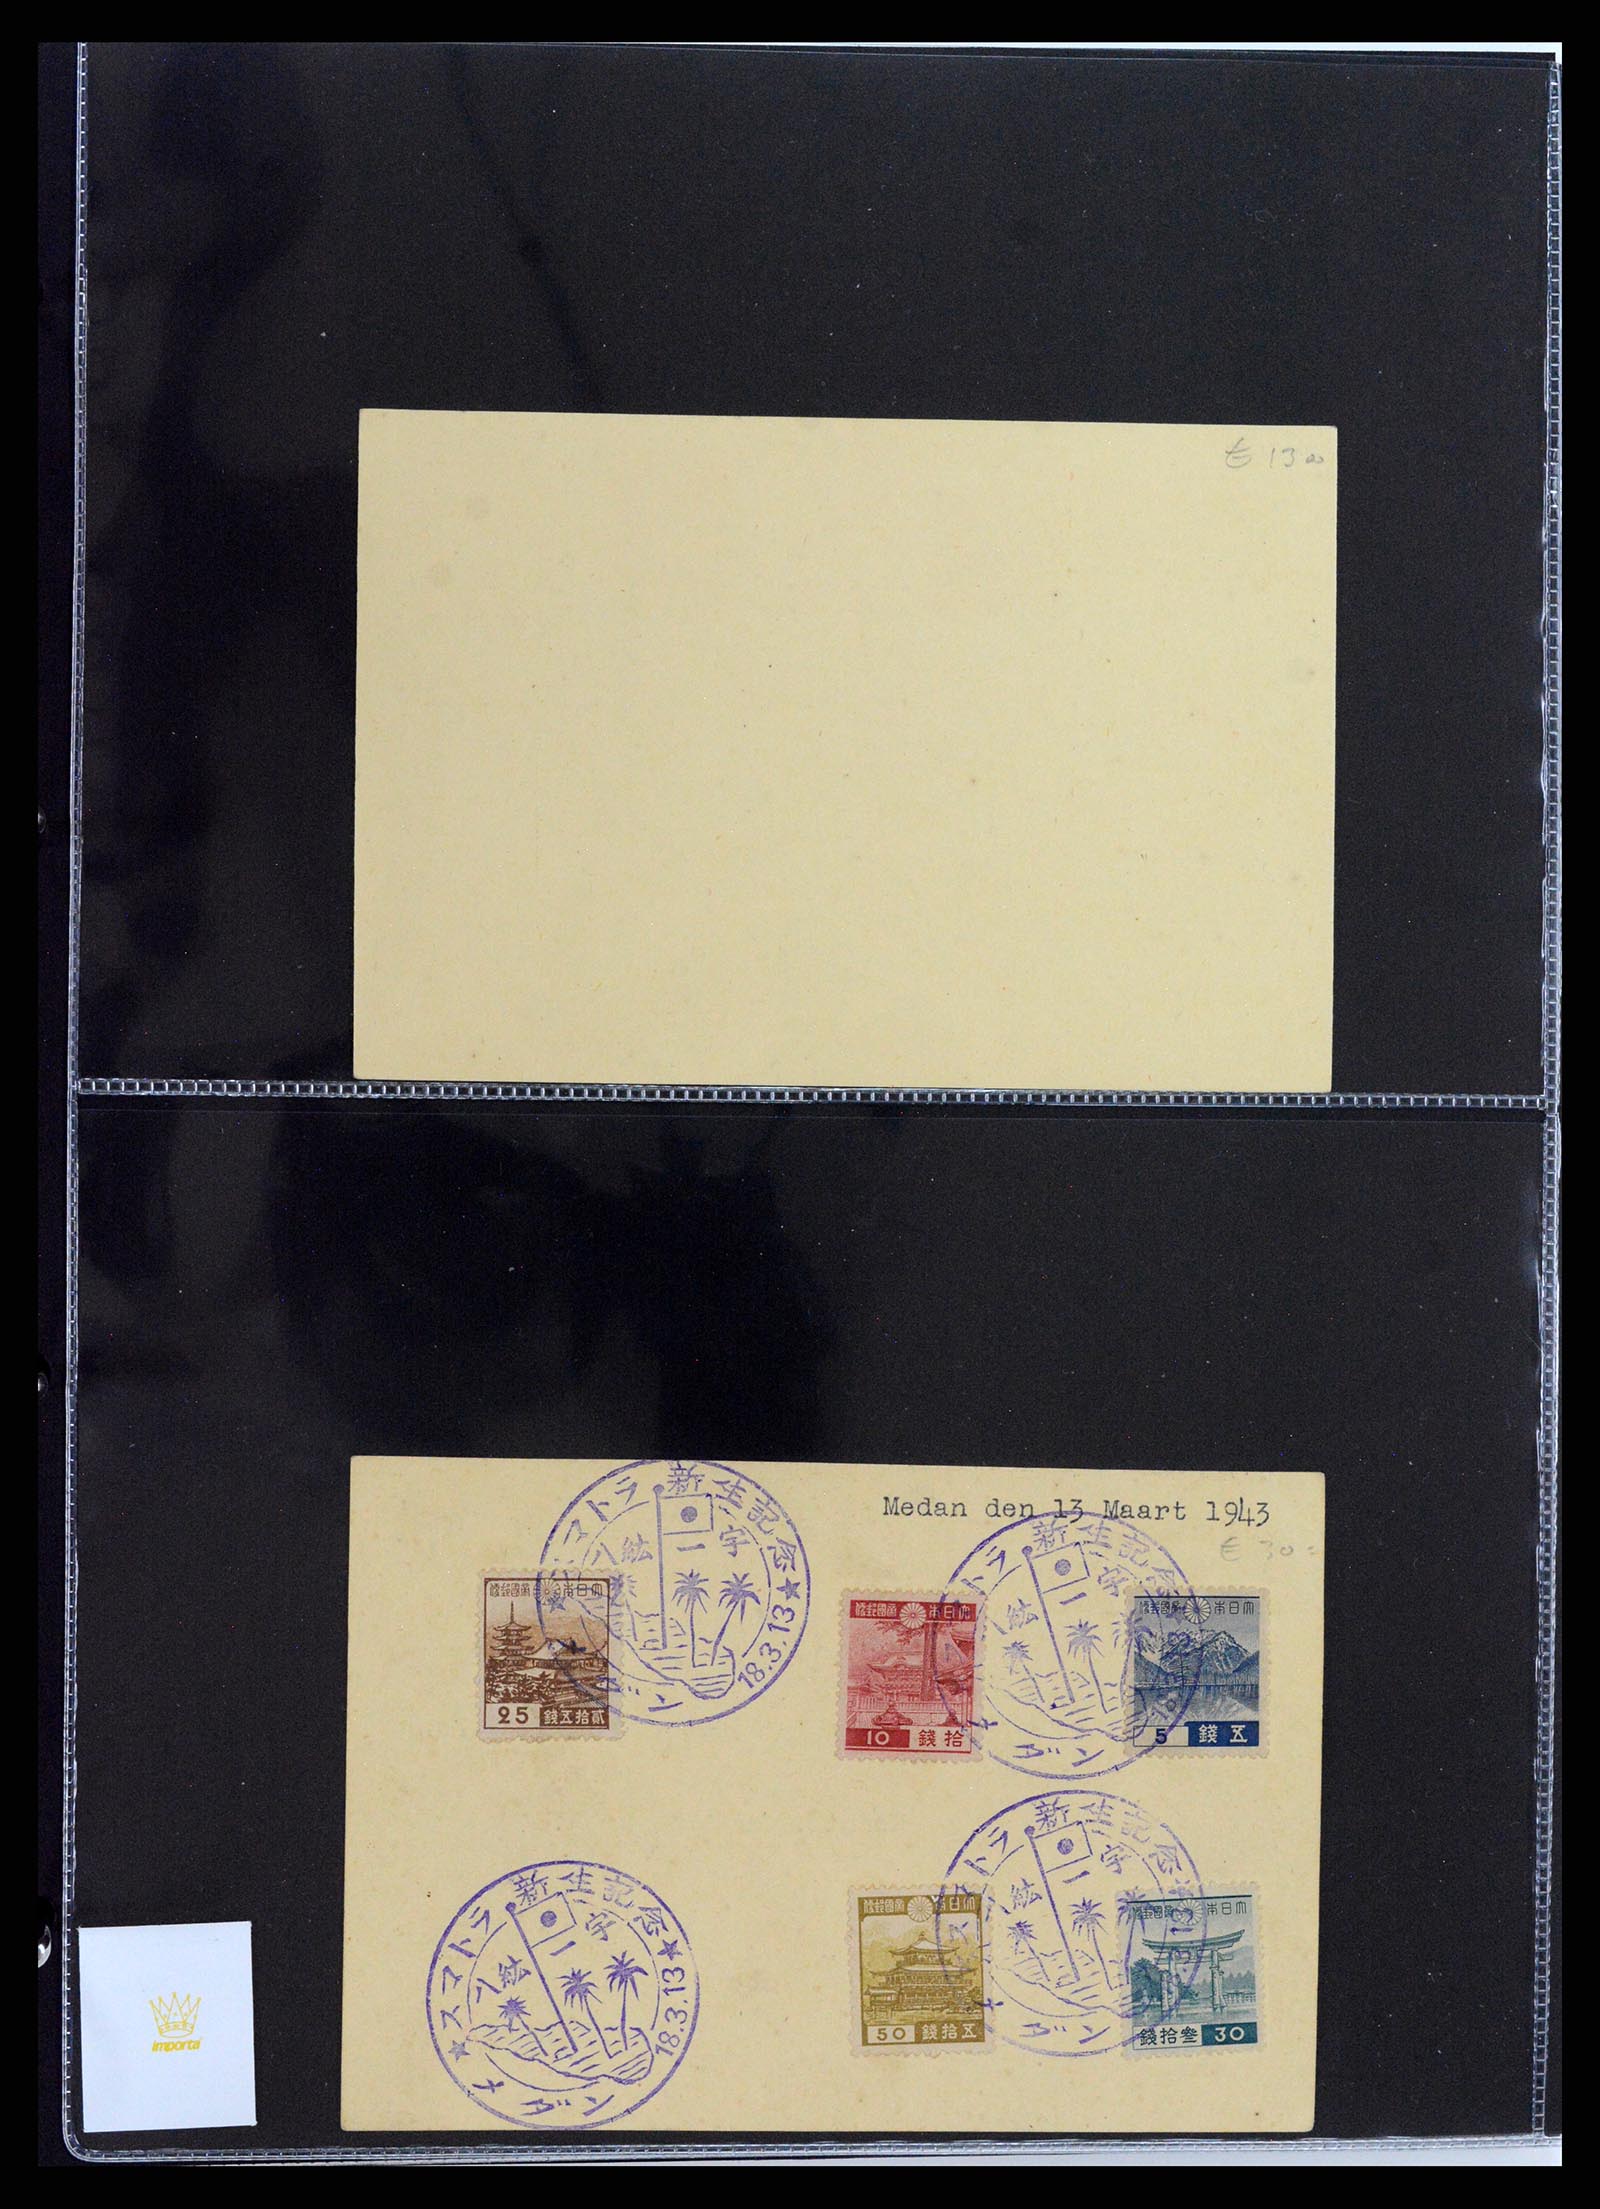 37423 051 - Stamp collection 37423 Dutch Indies Japanese occupation covers 1942-1945